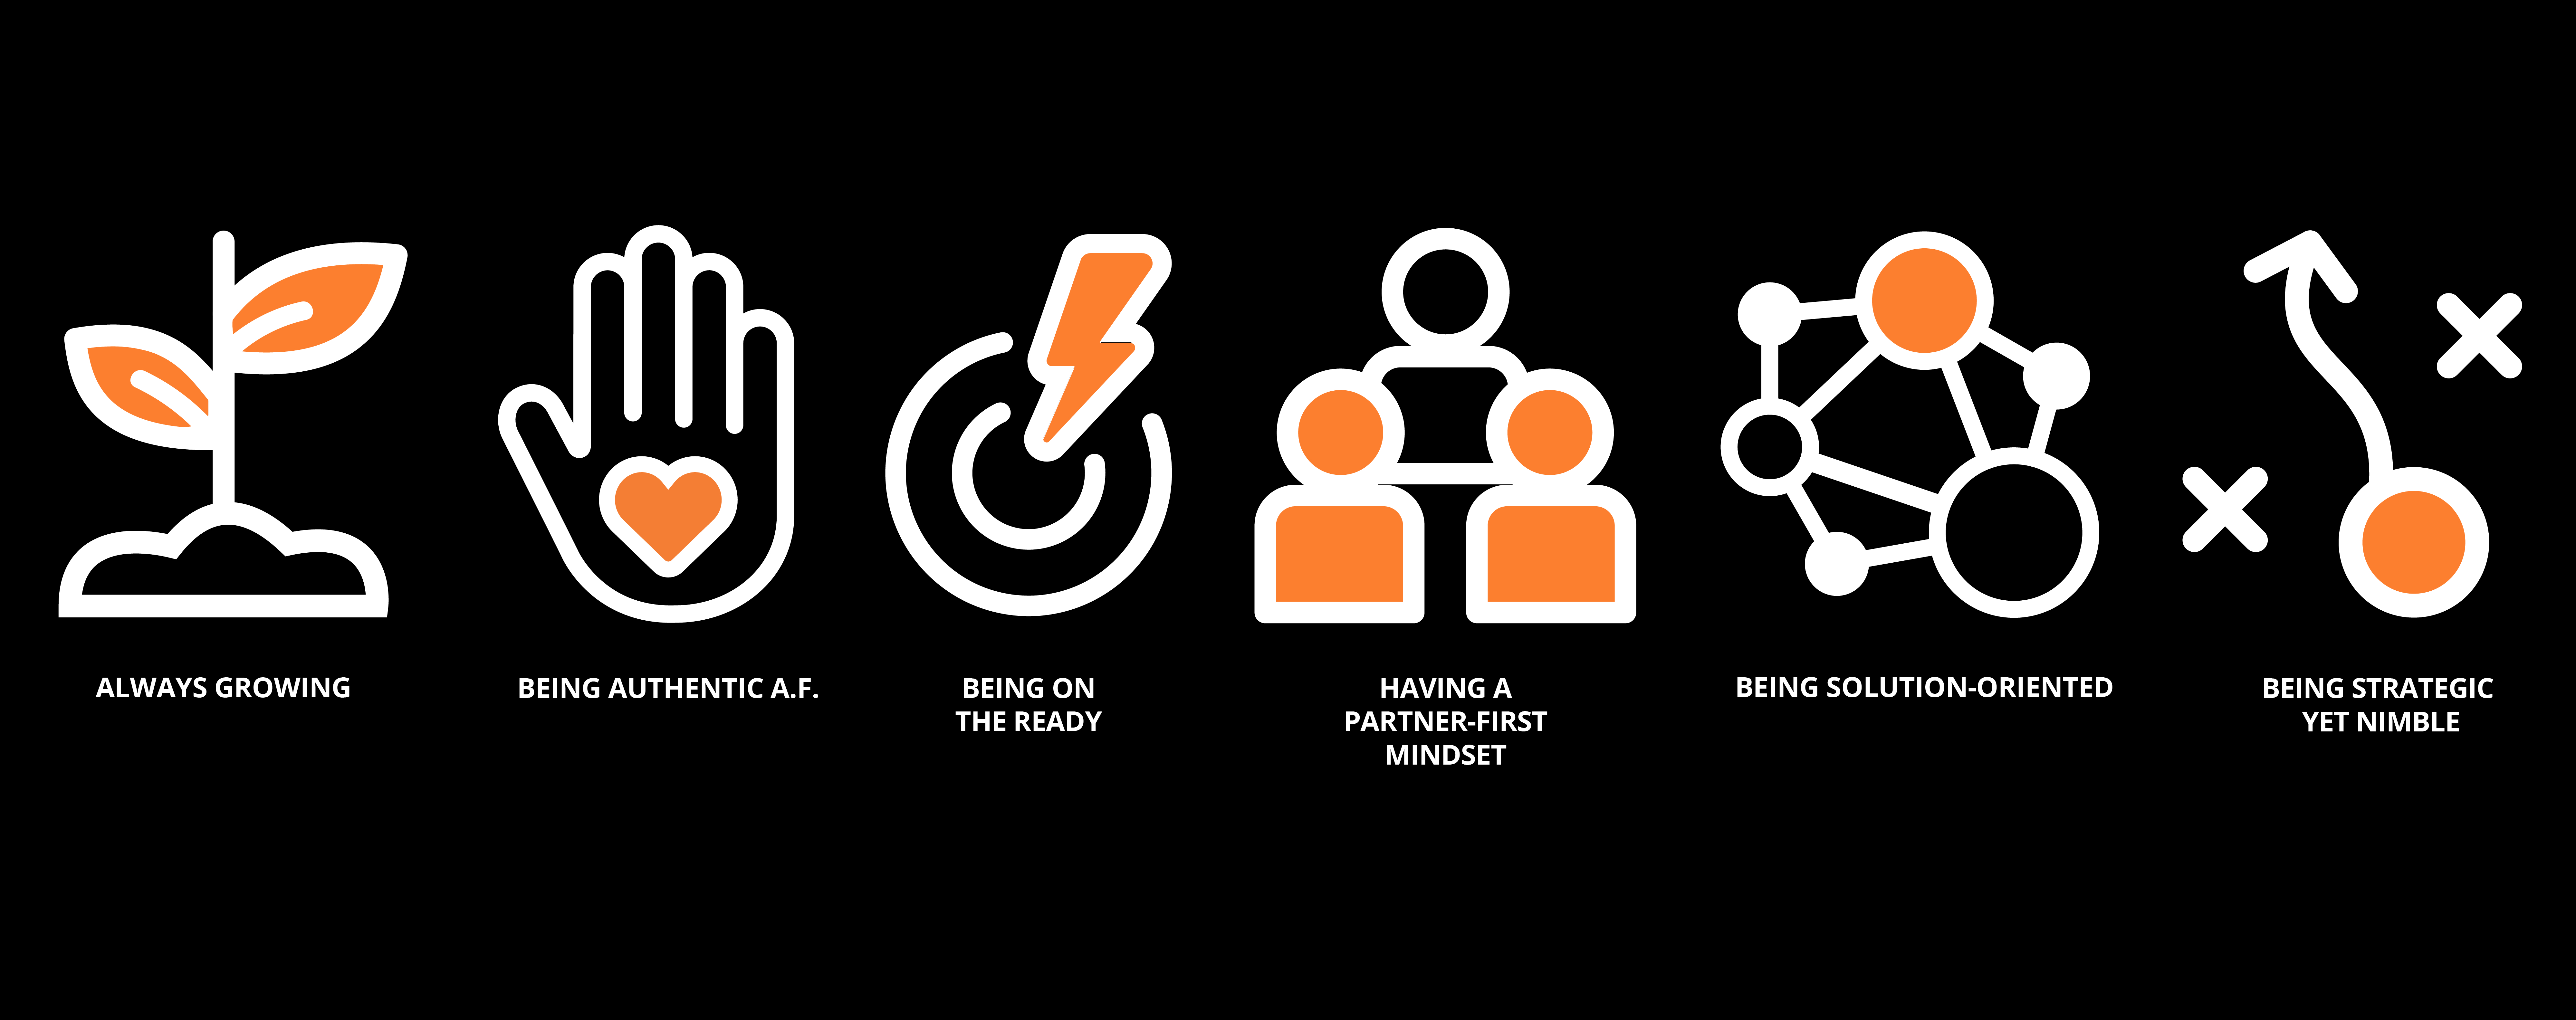 tg core value icons